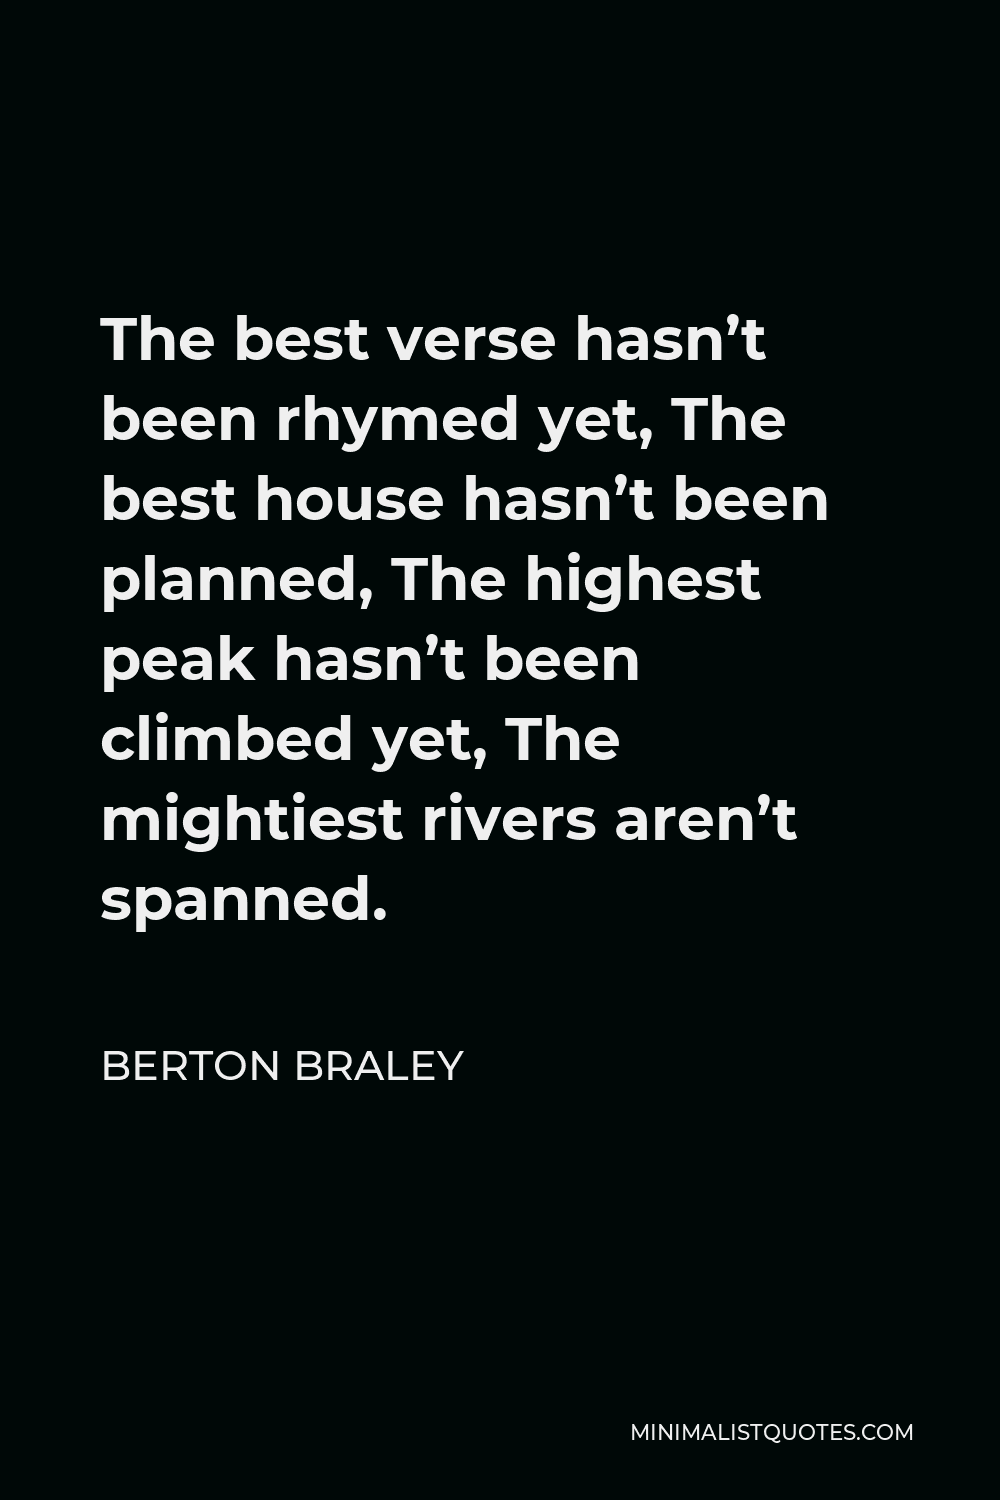 Berton Braley Quote - The best verse hasn’t been rhymed yet, The best house hasn’t been planned, The highest peak hasn’t been climbed yet, The mightiest rivers aren’t spanned.